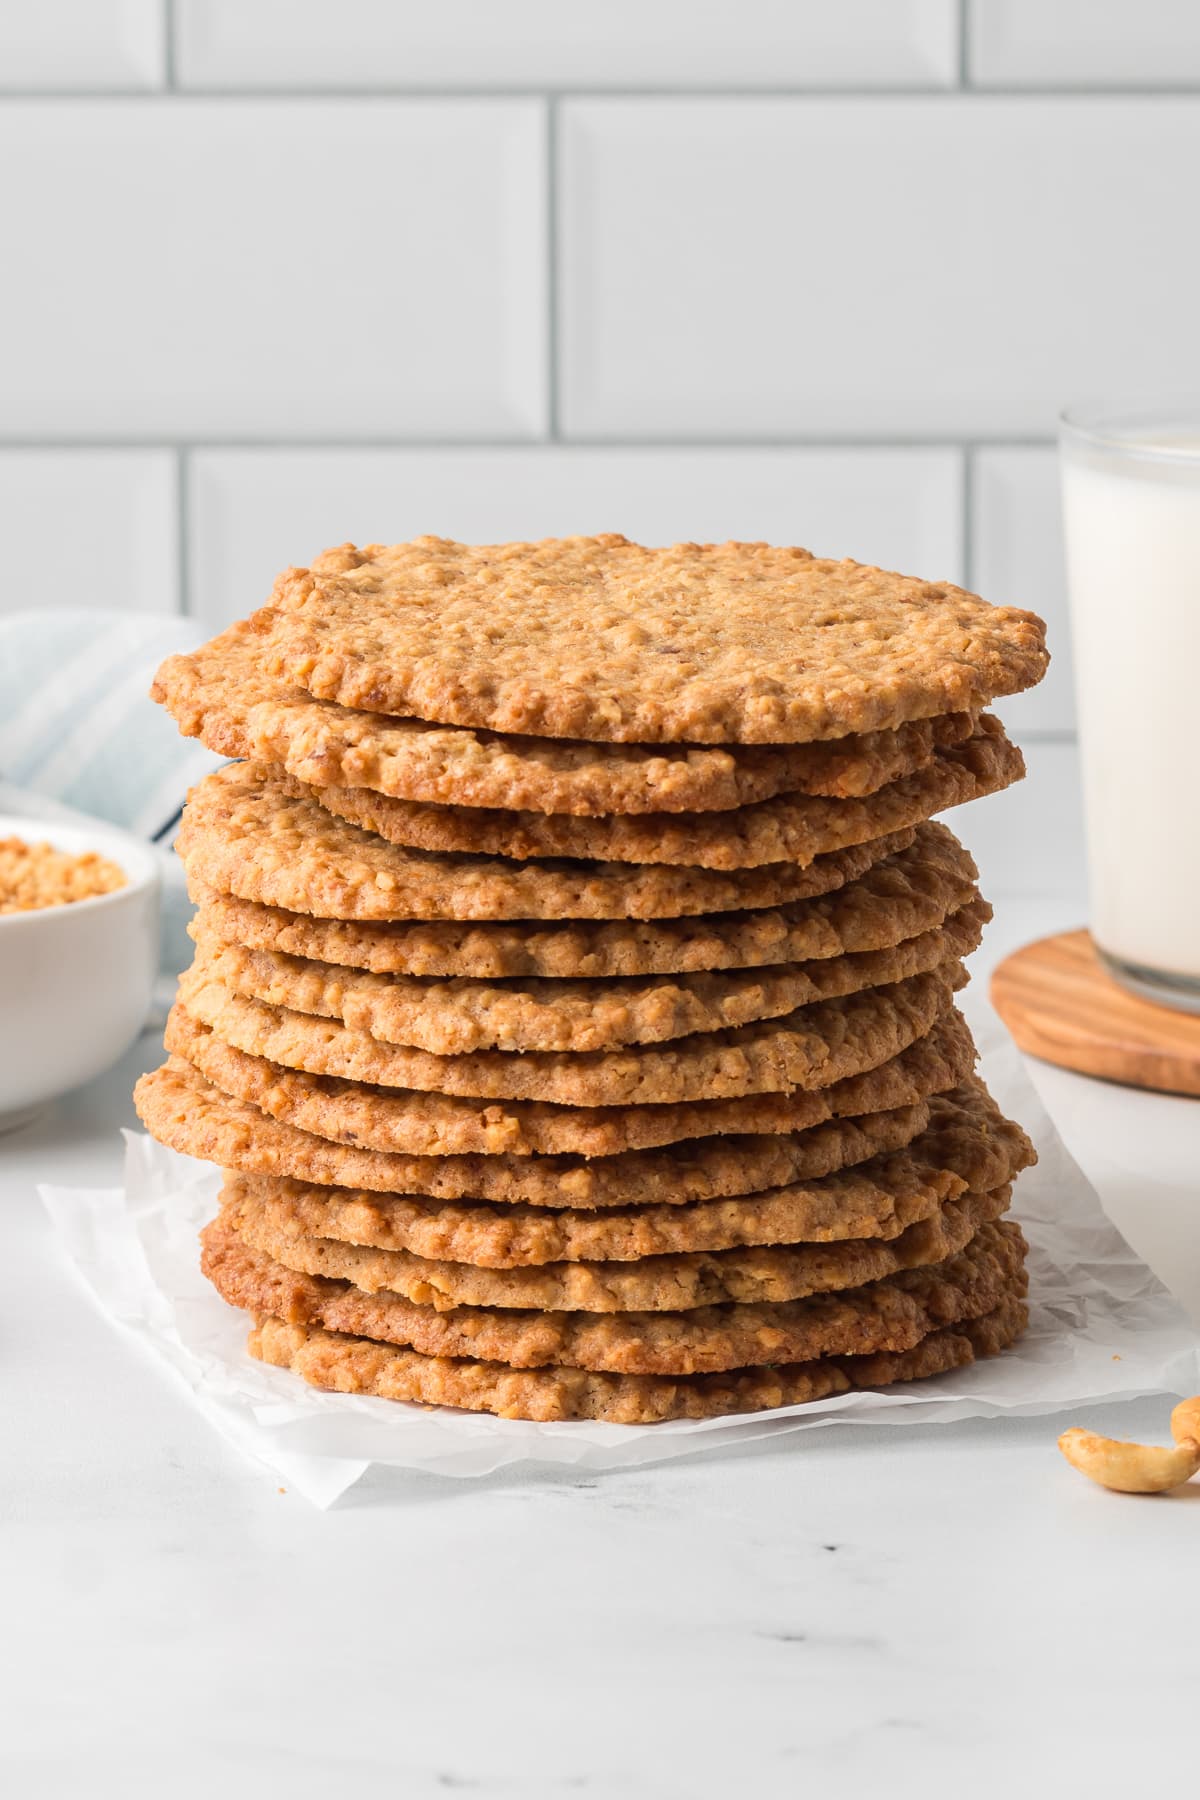 A stack of thin crispy peanut cookies on a kitchen counter.